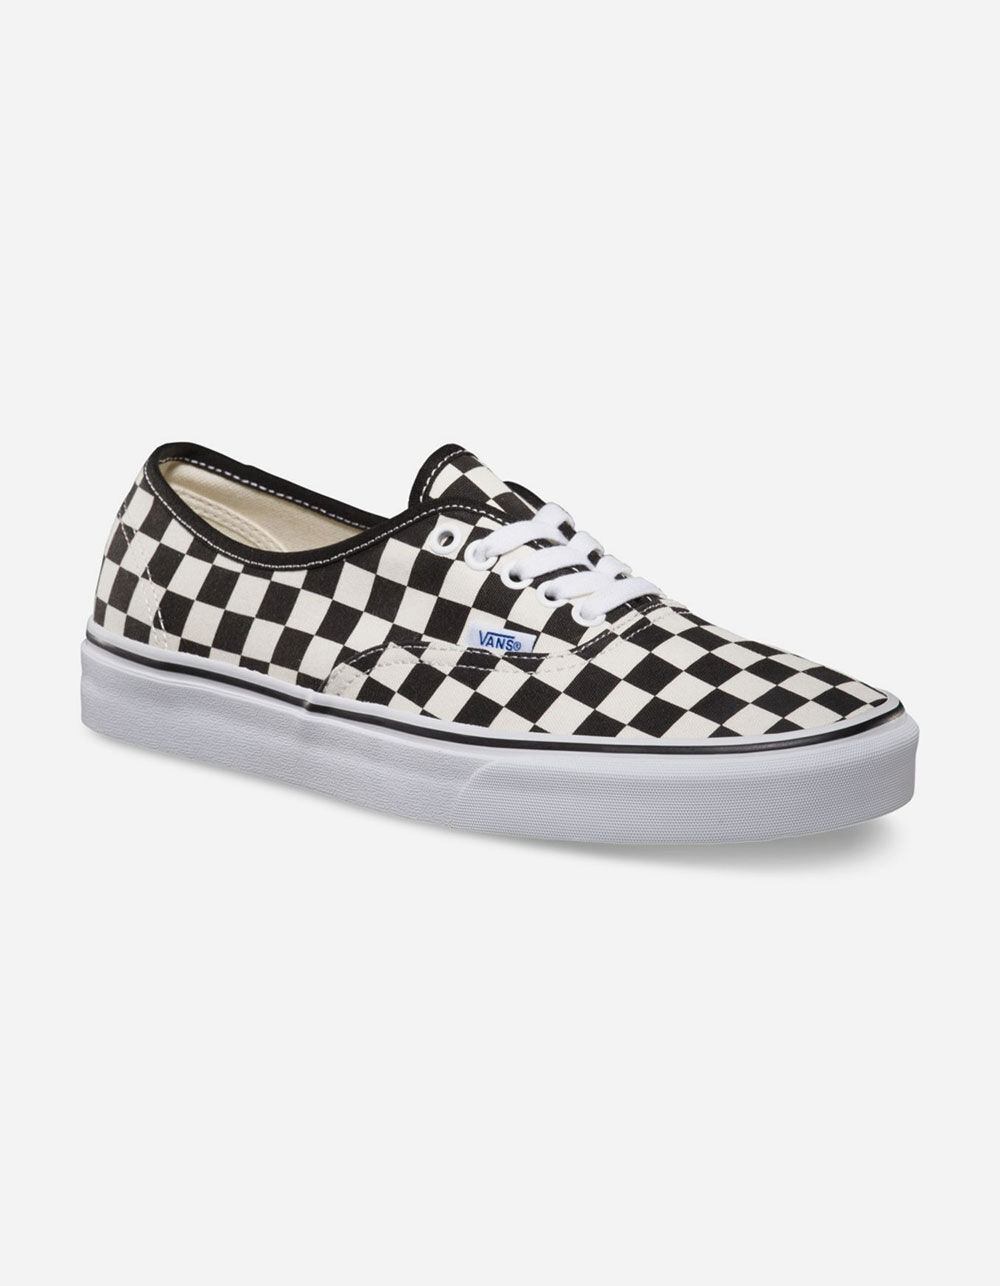 VANS Authentic Golden Coast Checkerboard Shoes image number 1